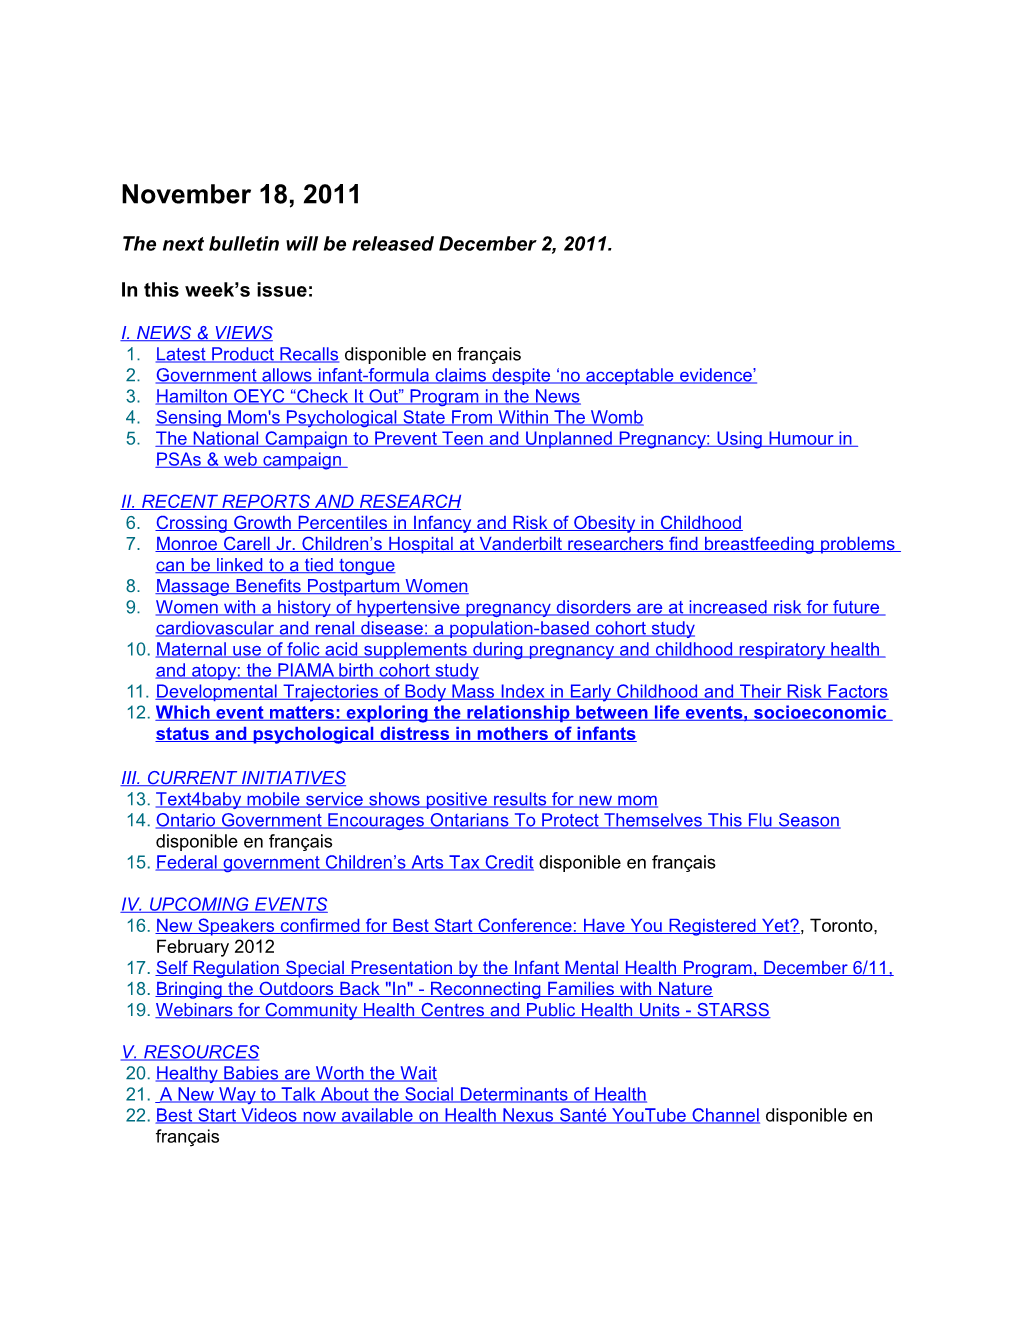 The Next Bulletin Will Be Released December 2, 2011